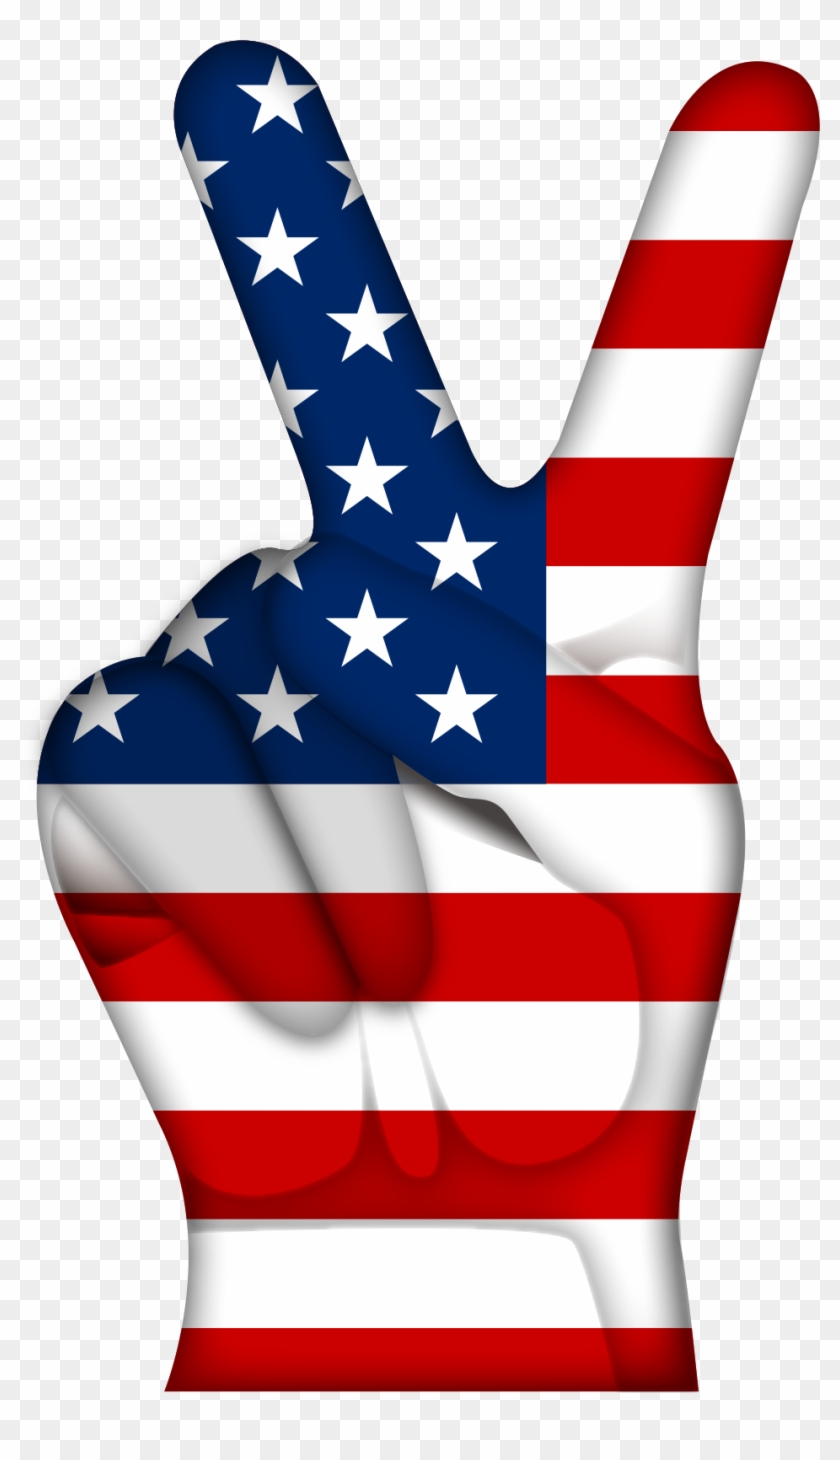 V Sign Computer File - Victory Sign Made Of American Flag Shower Curtain #467496